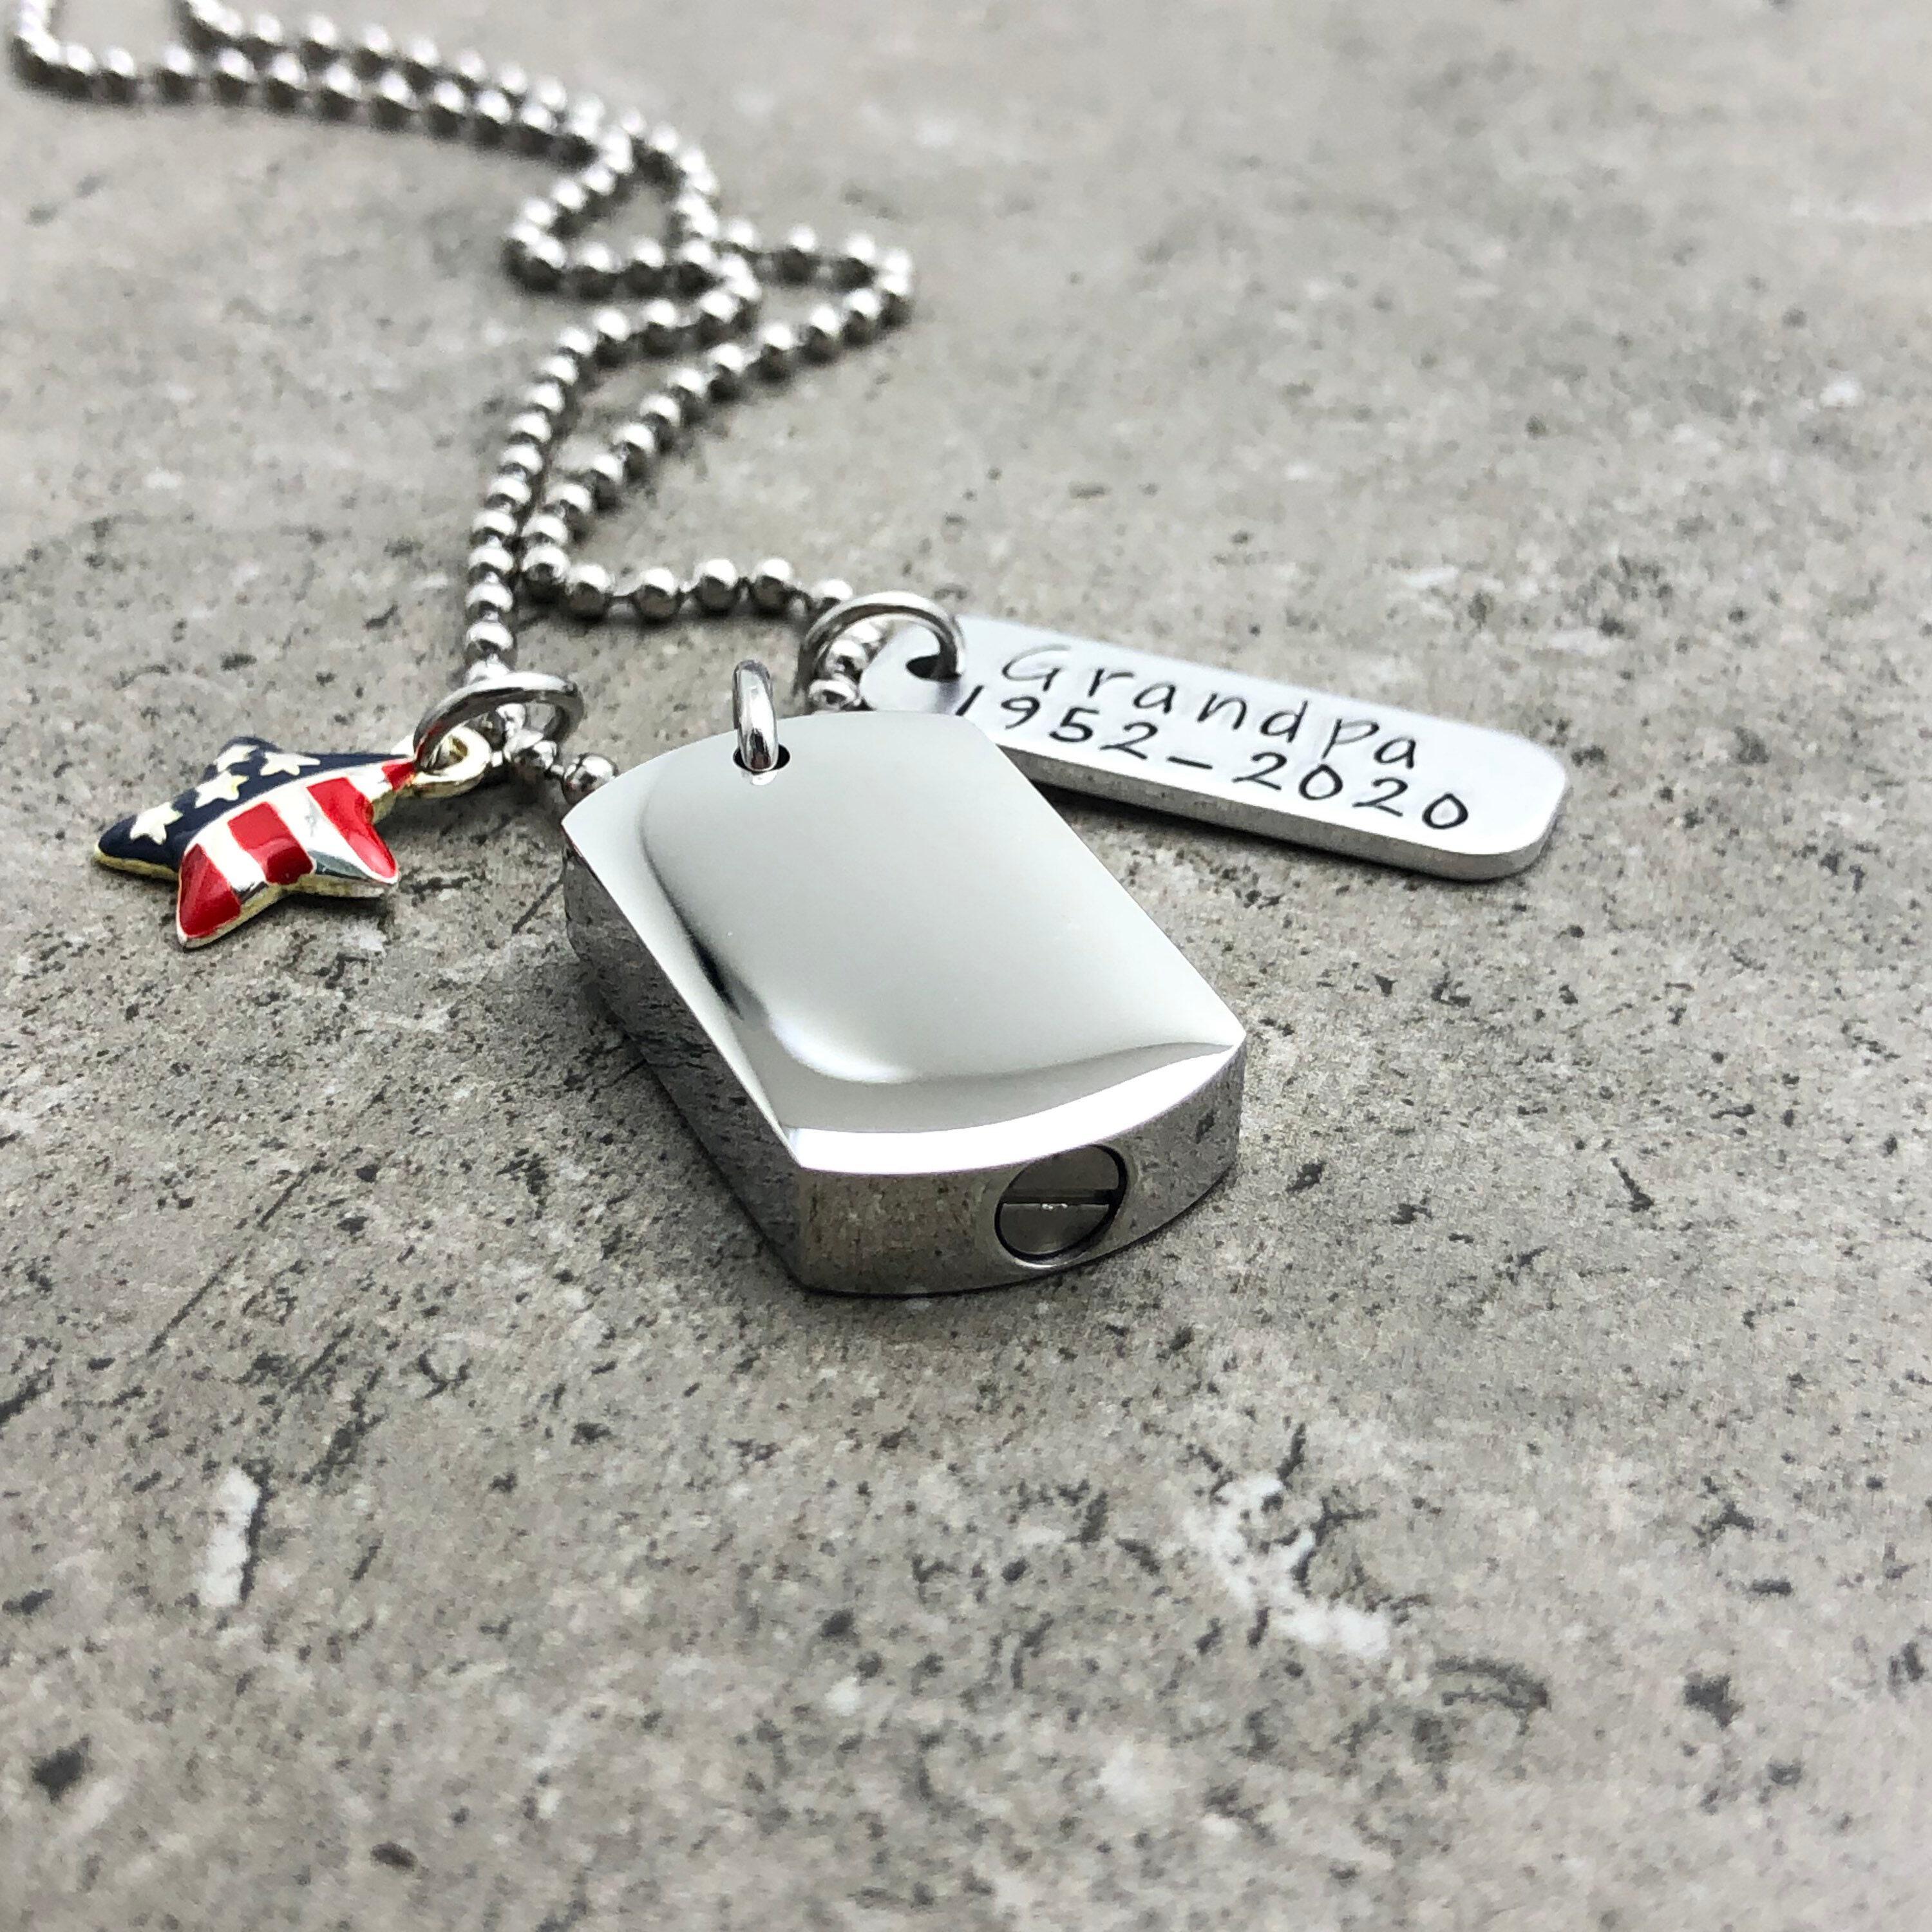 Department of The Army Dog Tag Cremation Jewelry Engraved Pendant - Silver